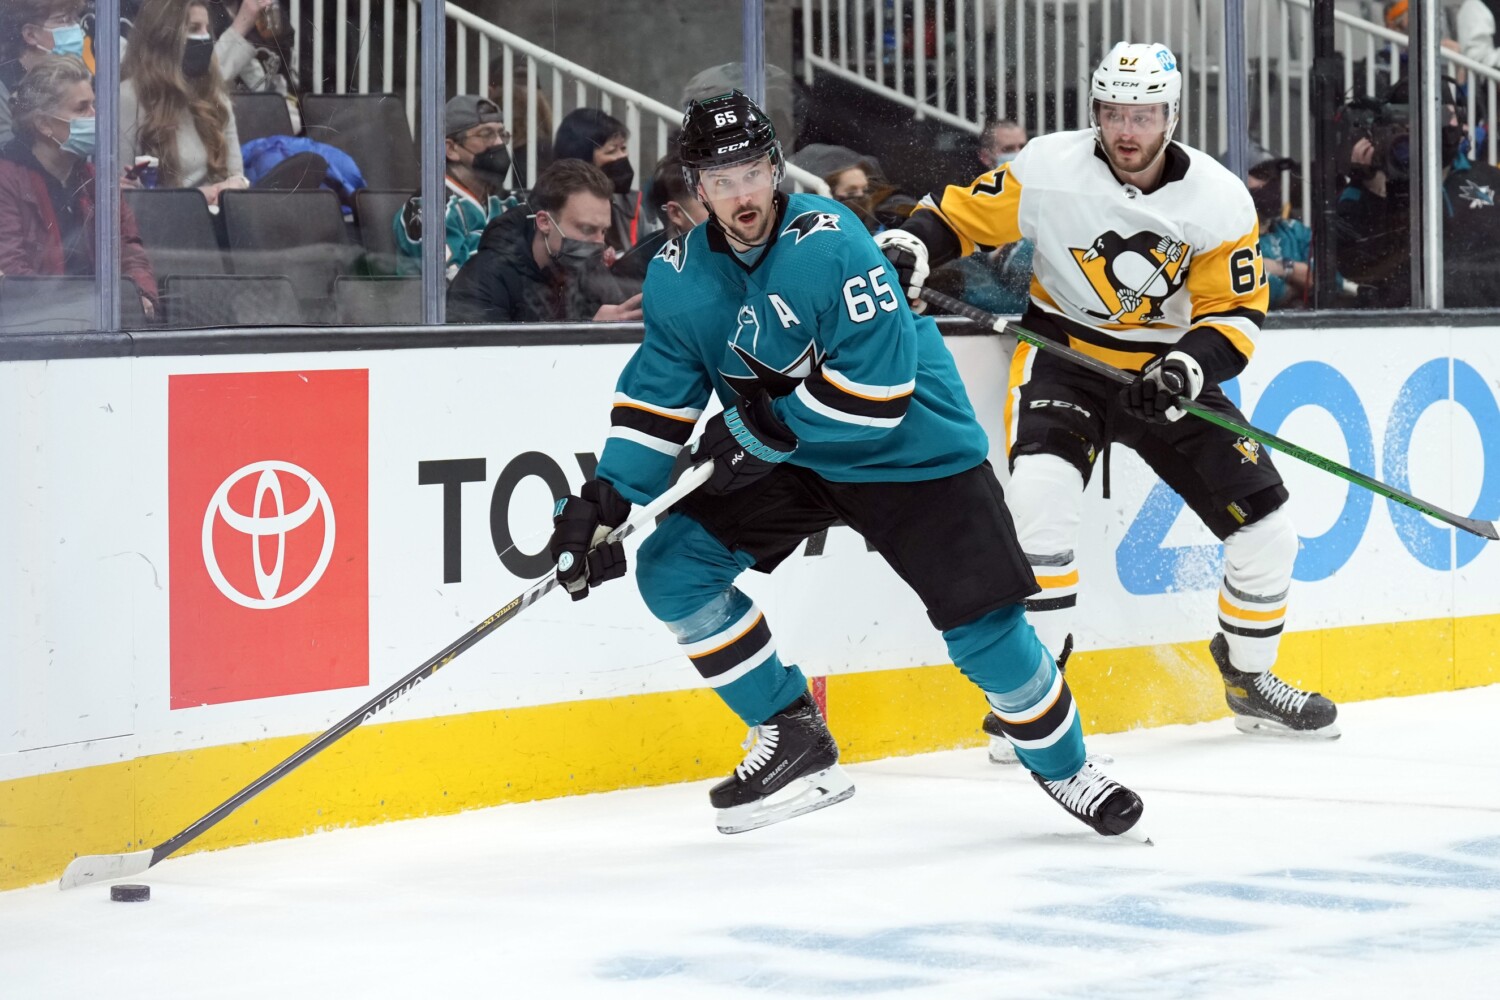 Erik Karlsson to Penguins in 3-team trade with Sharks, Canadiens